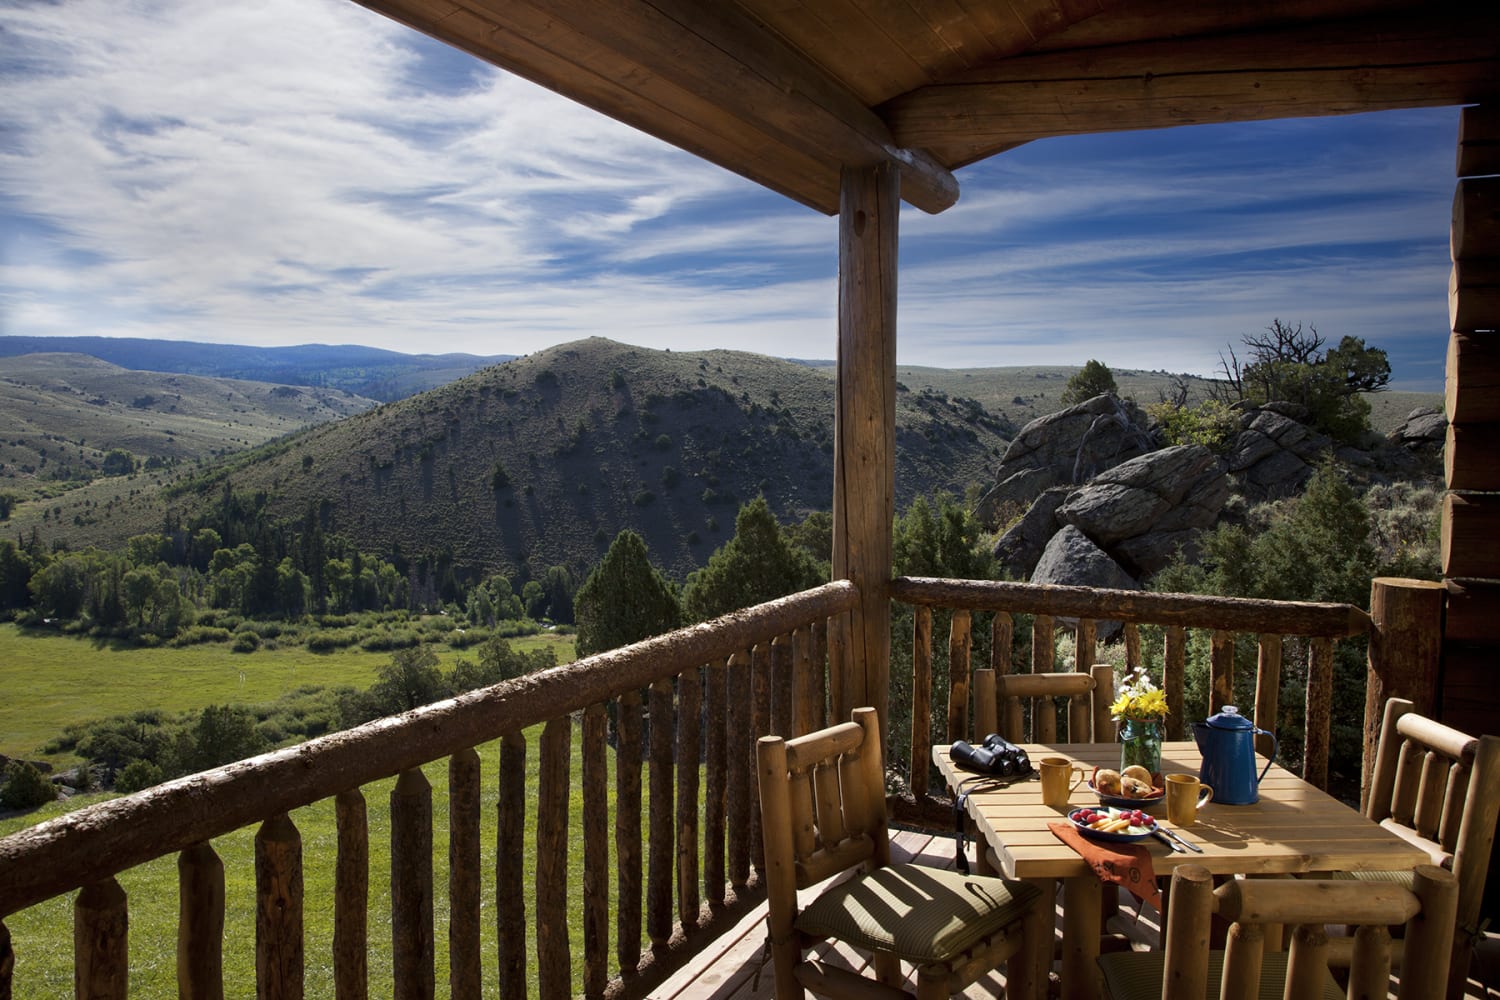 11 of the best romantic getaways in the United States